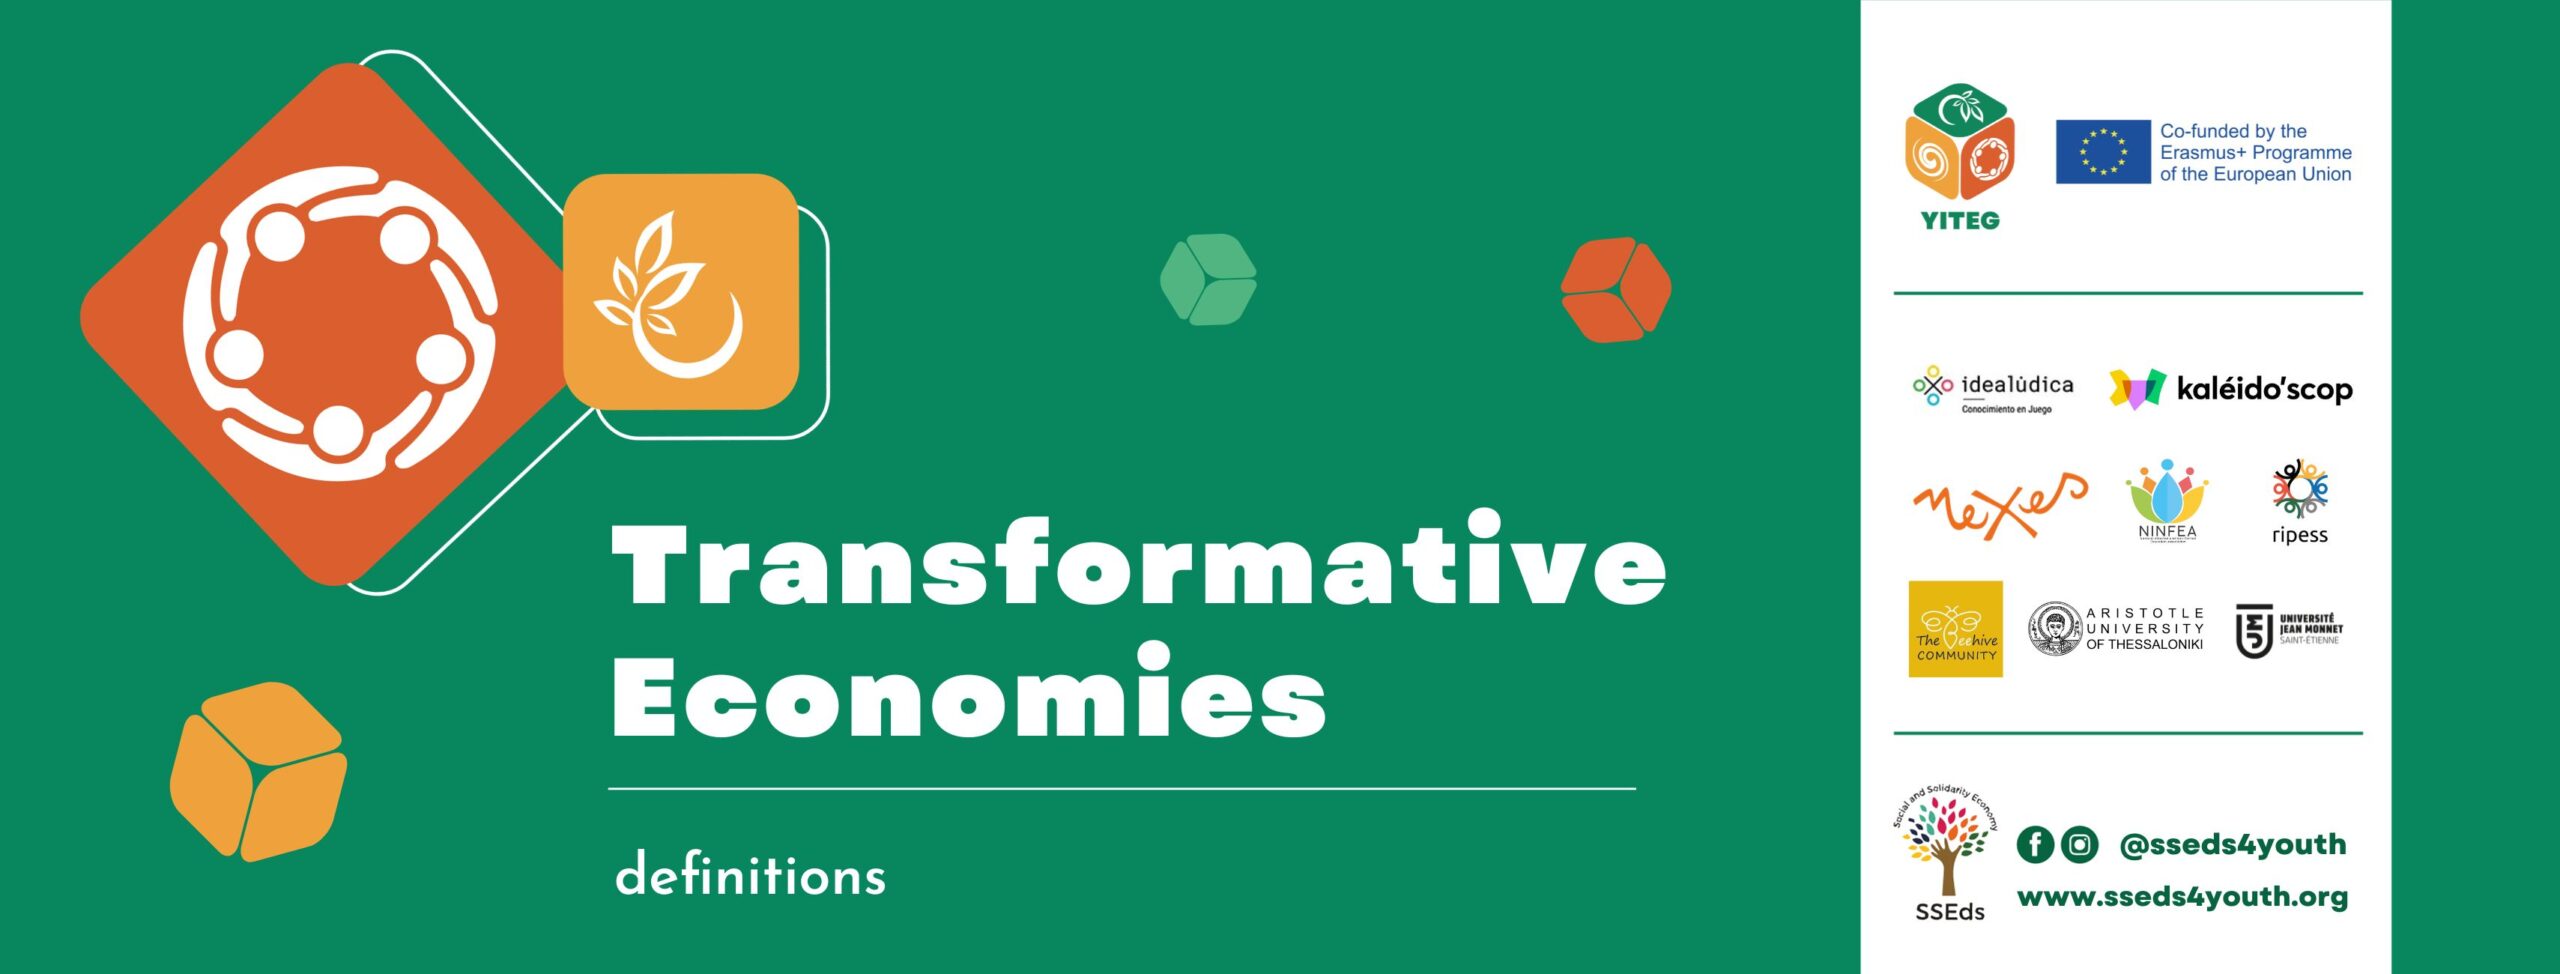 Transformative Economies: towards the construction of a new world